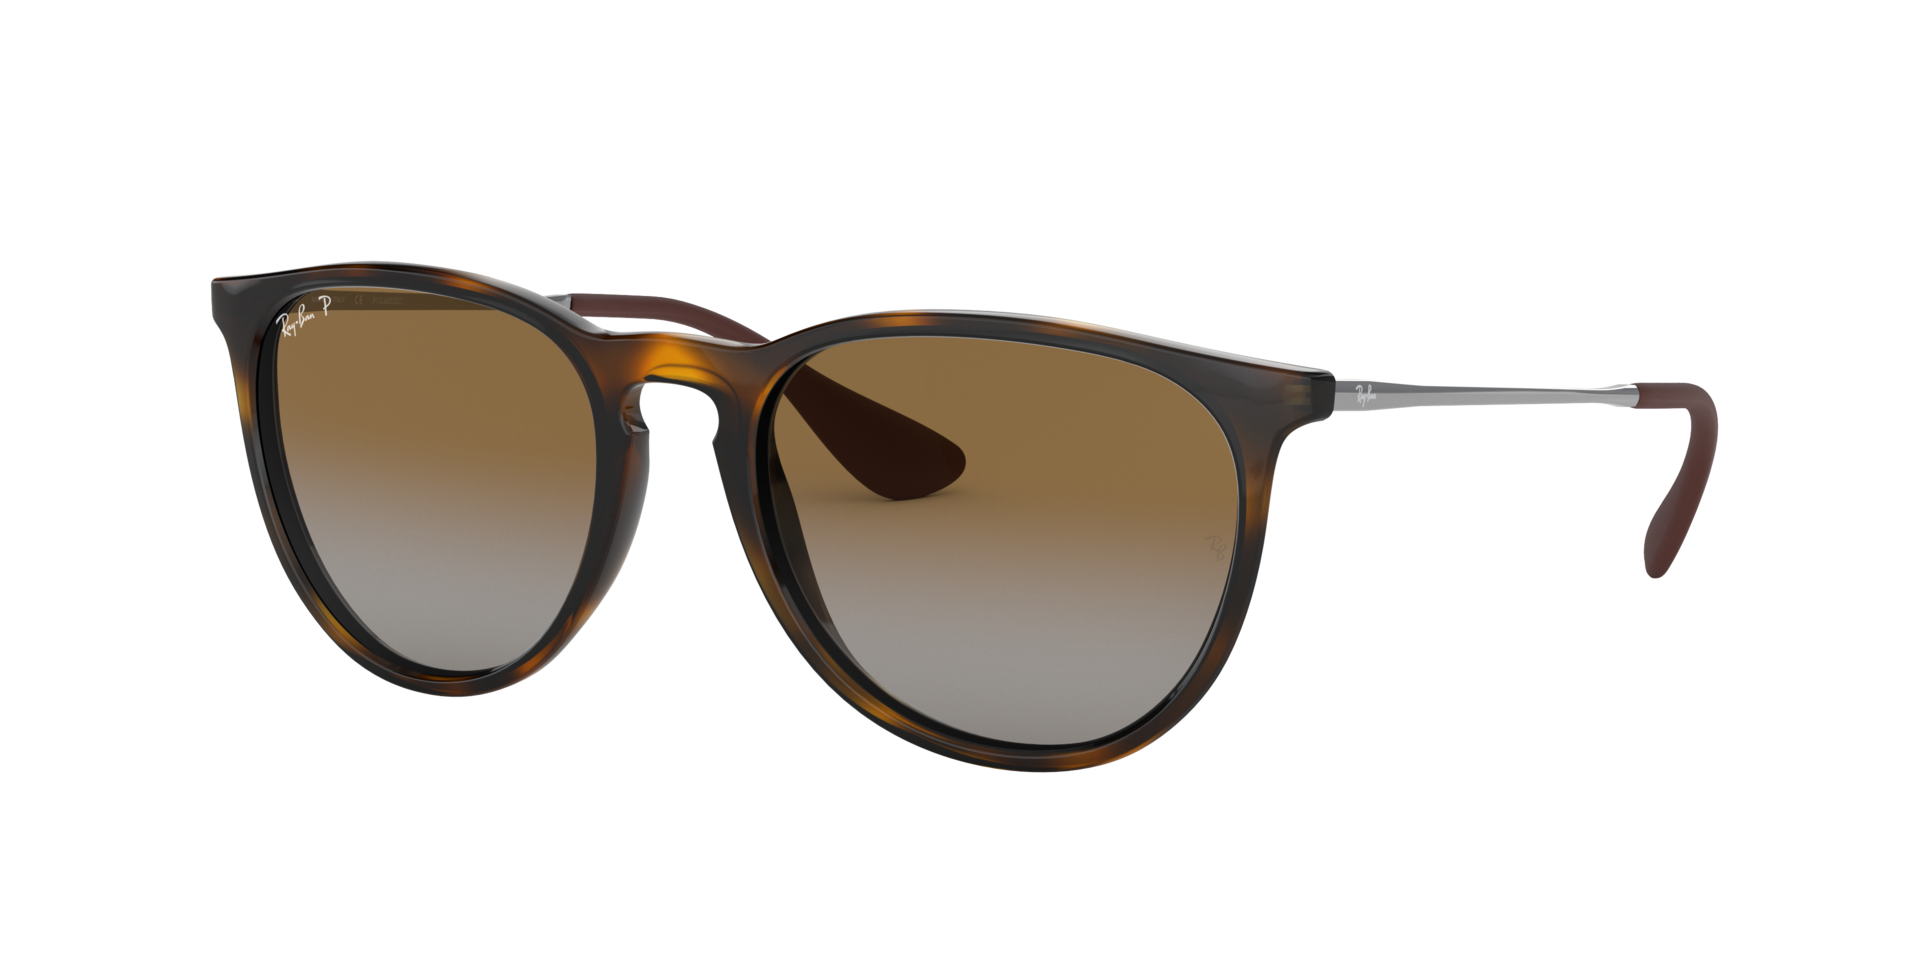 Ray-Ban ERIKA Sonnenbrille RB4171 710/T5 54